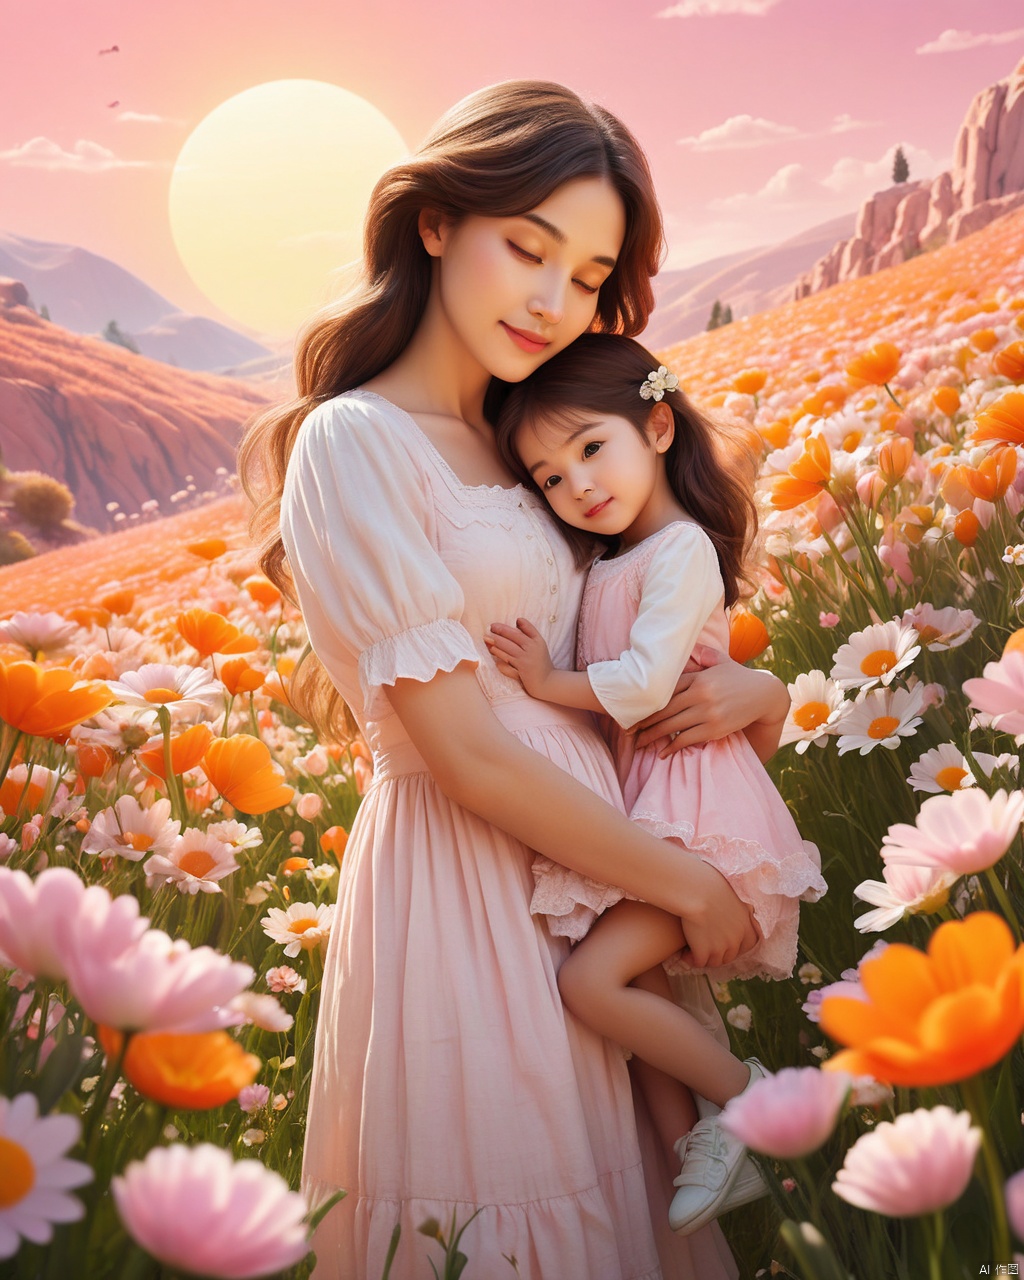 Masterpiece, best quality, stunning details, realistic, a cute mother daughter embrace, surrounded by flowers and eggs, dreamy scenery, soft and atmospheric perspective, vibrant orange and pink stage backgrounds, childlike innocence and charm, bold shapes and cute characters, with a simple white sun in the sky against a pink background